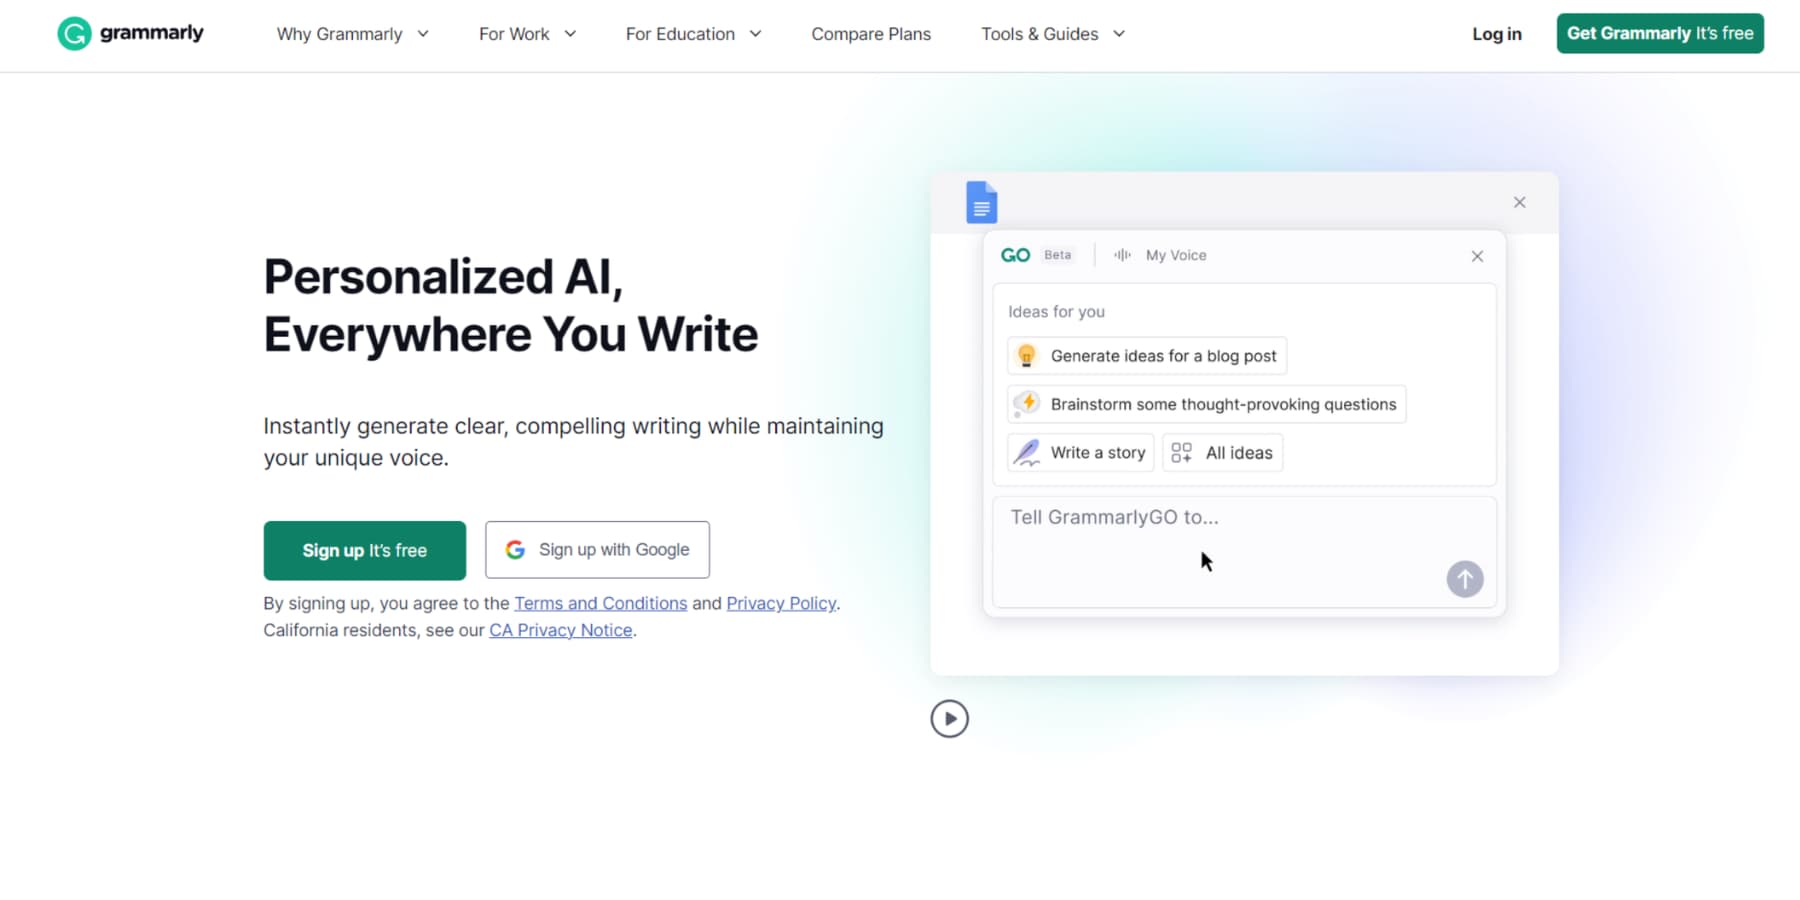 A screenshot of Grammarly's Homepage